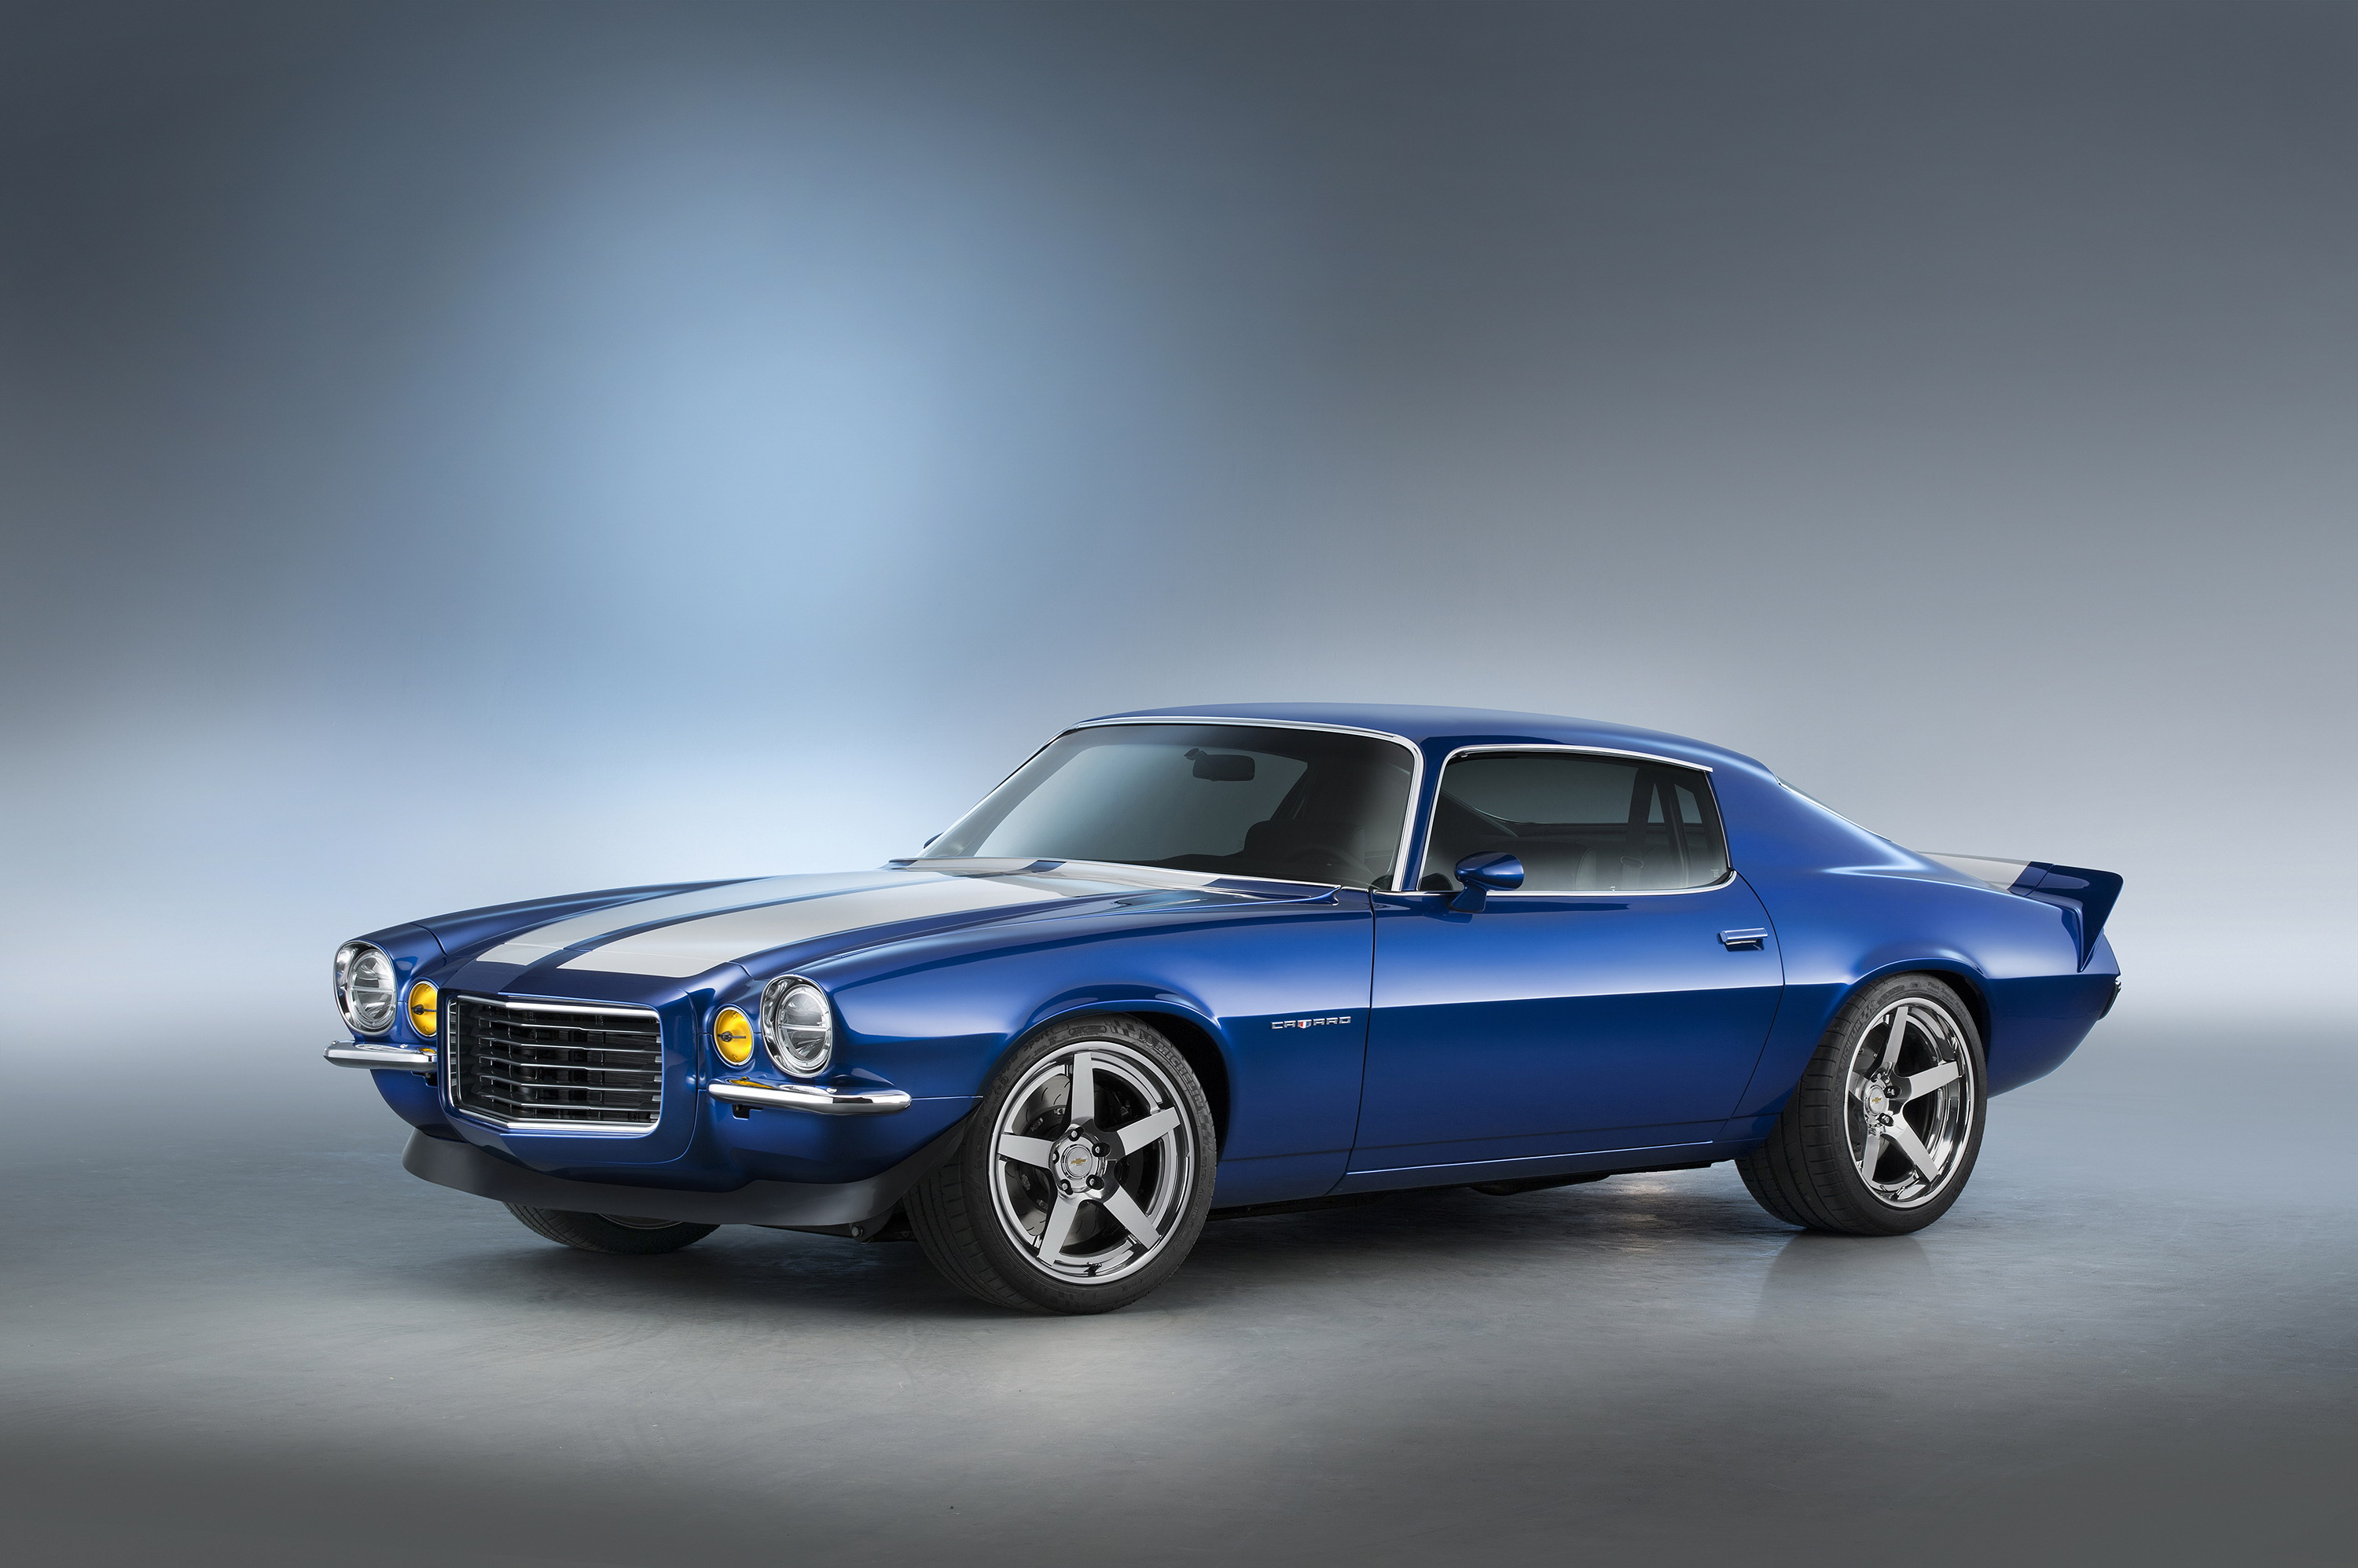 1970 Chevrolet Camaro Rs With Supercharged Lt4 - Chevrolet Camaro 1970 , HD Wallpaper & Backgrounds